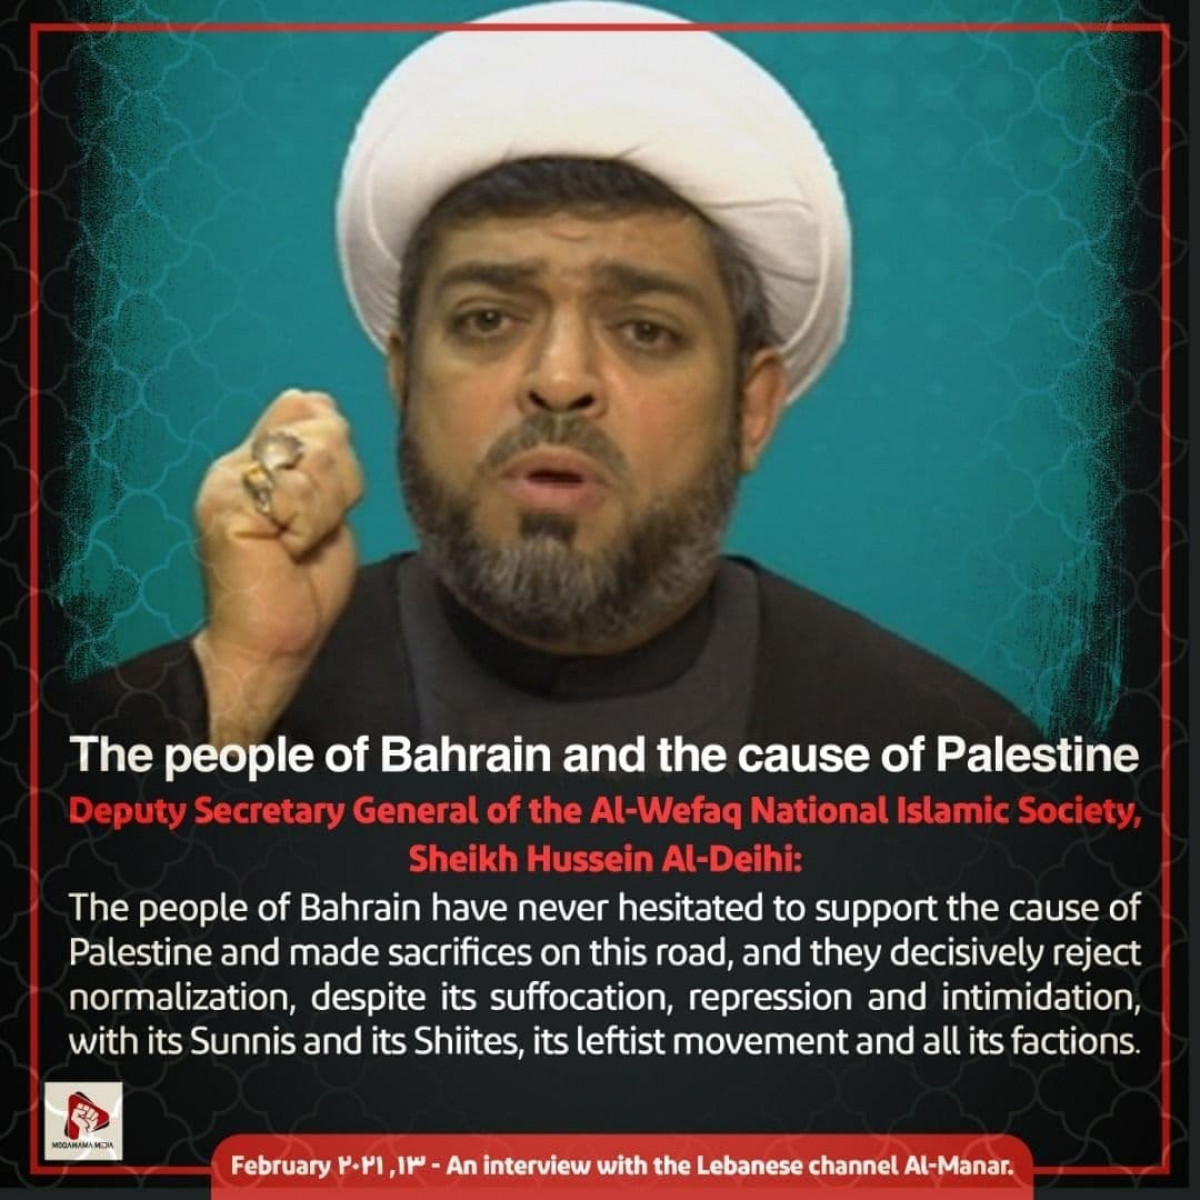 Collection of posters: The people of Bahrain and the cause of Palestine